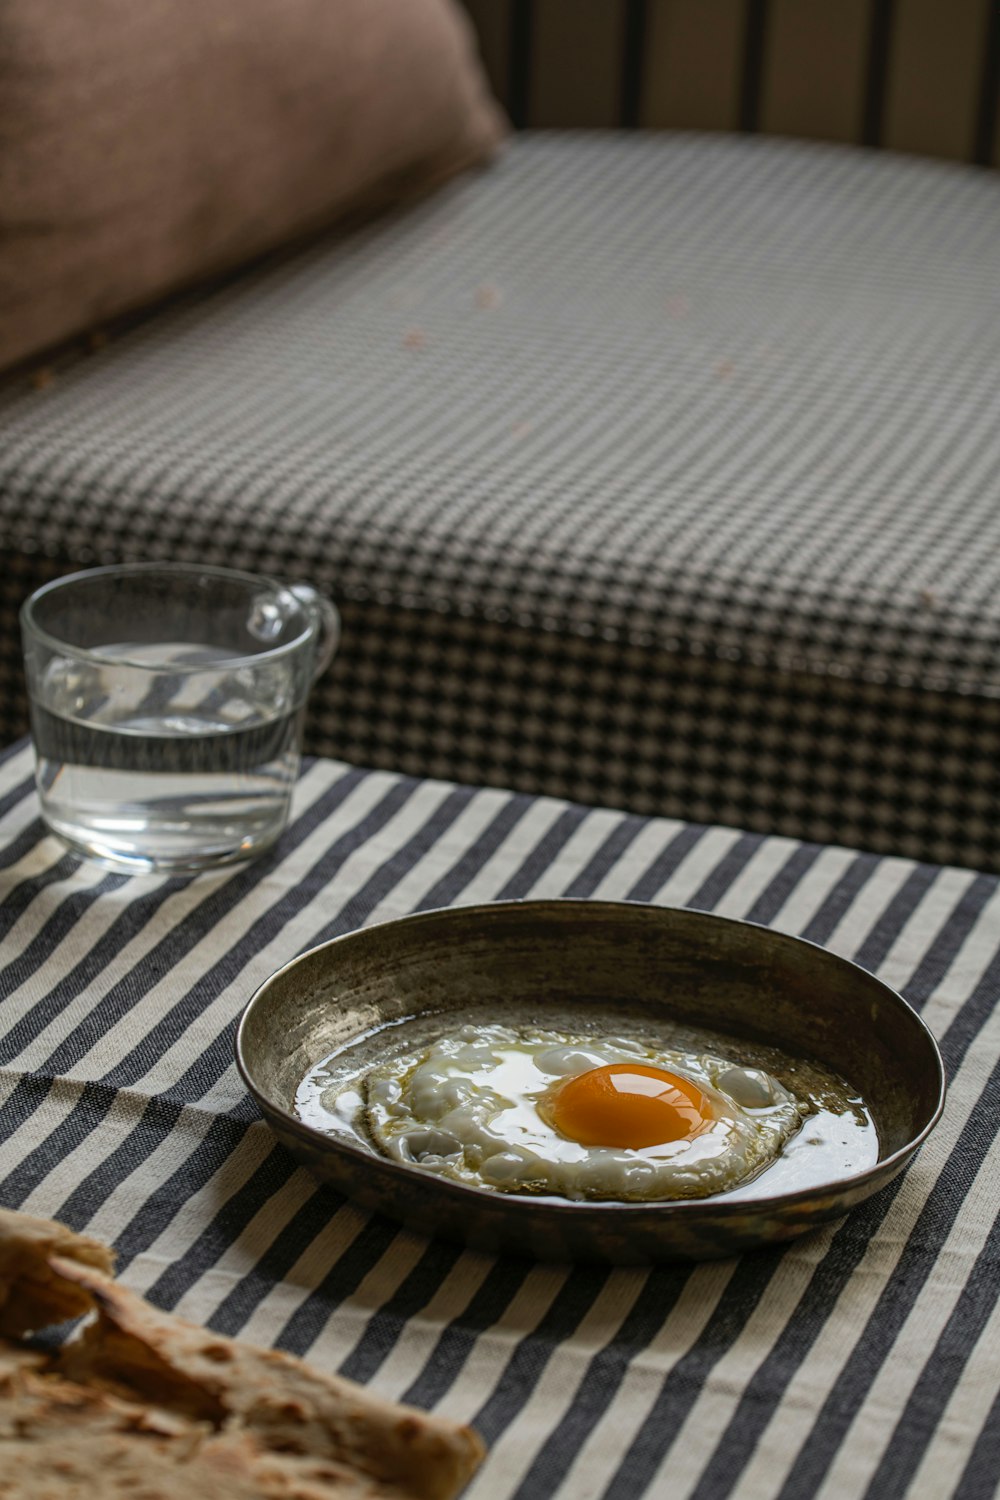 a bowl of eggs on a table next to a glass of water